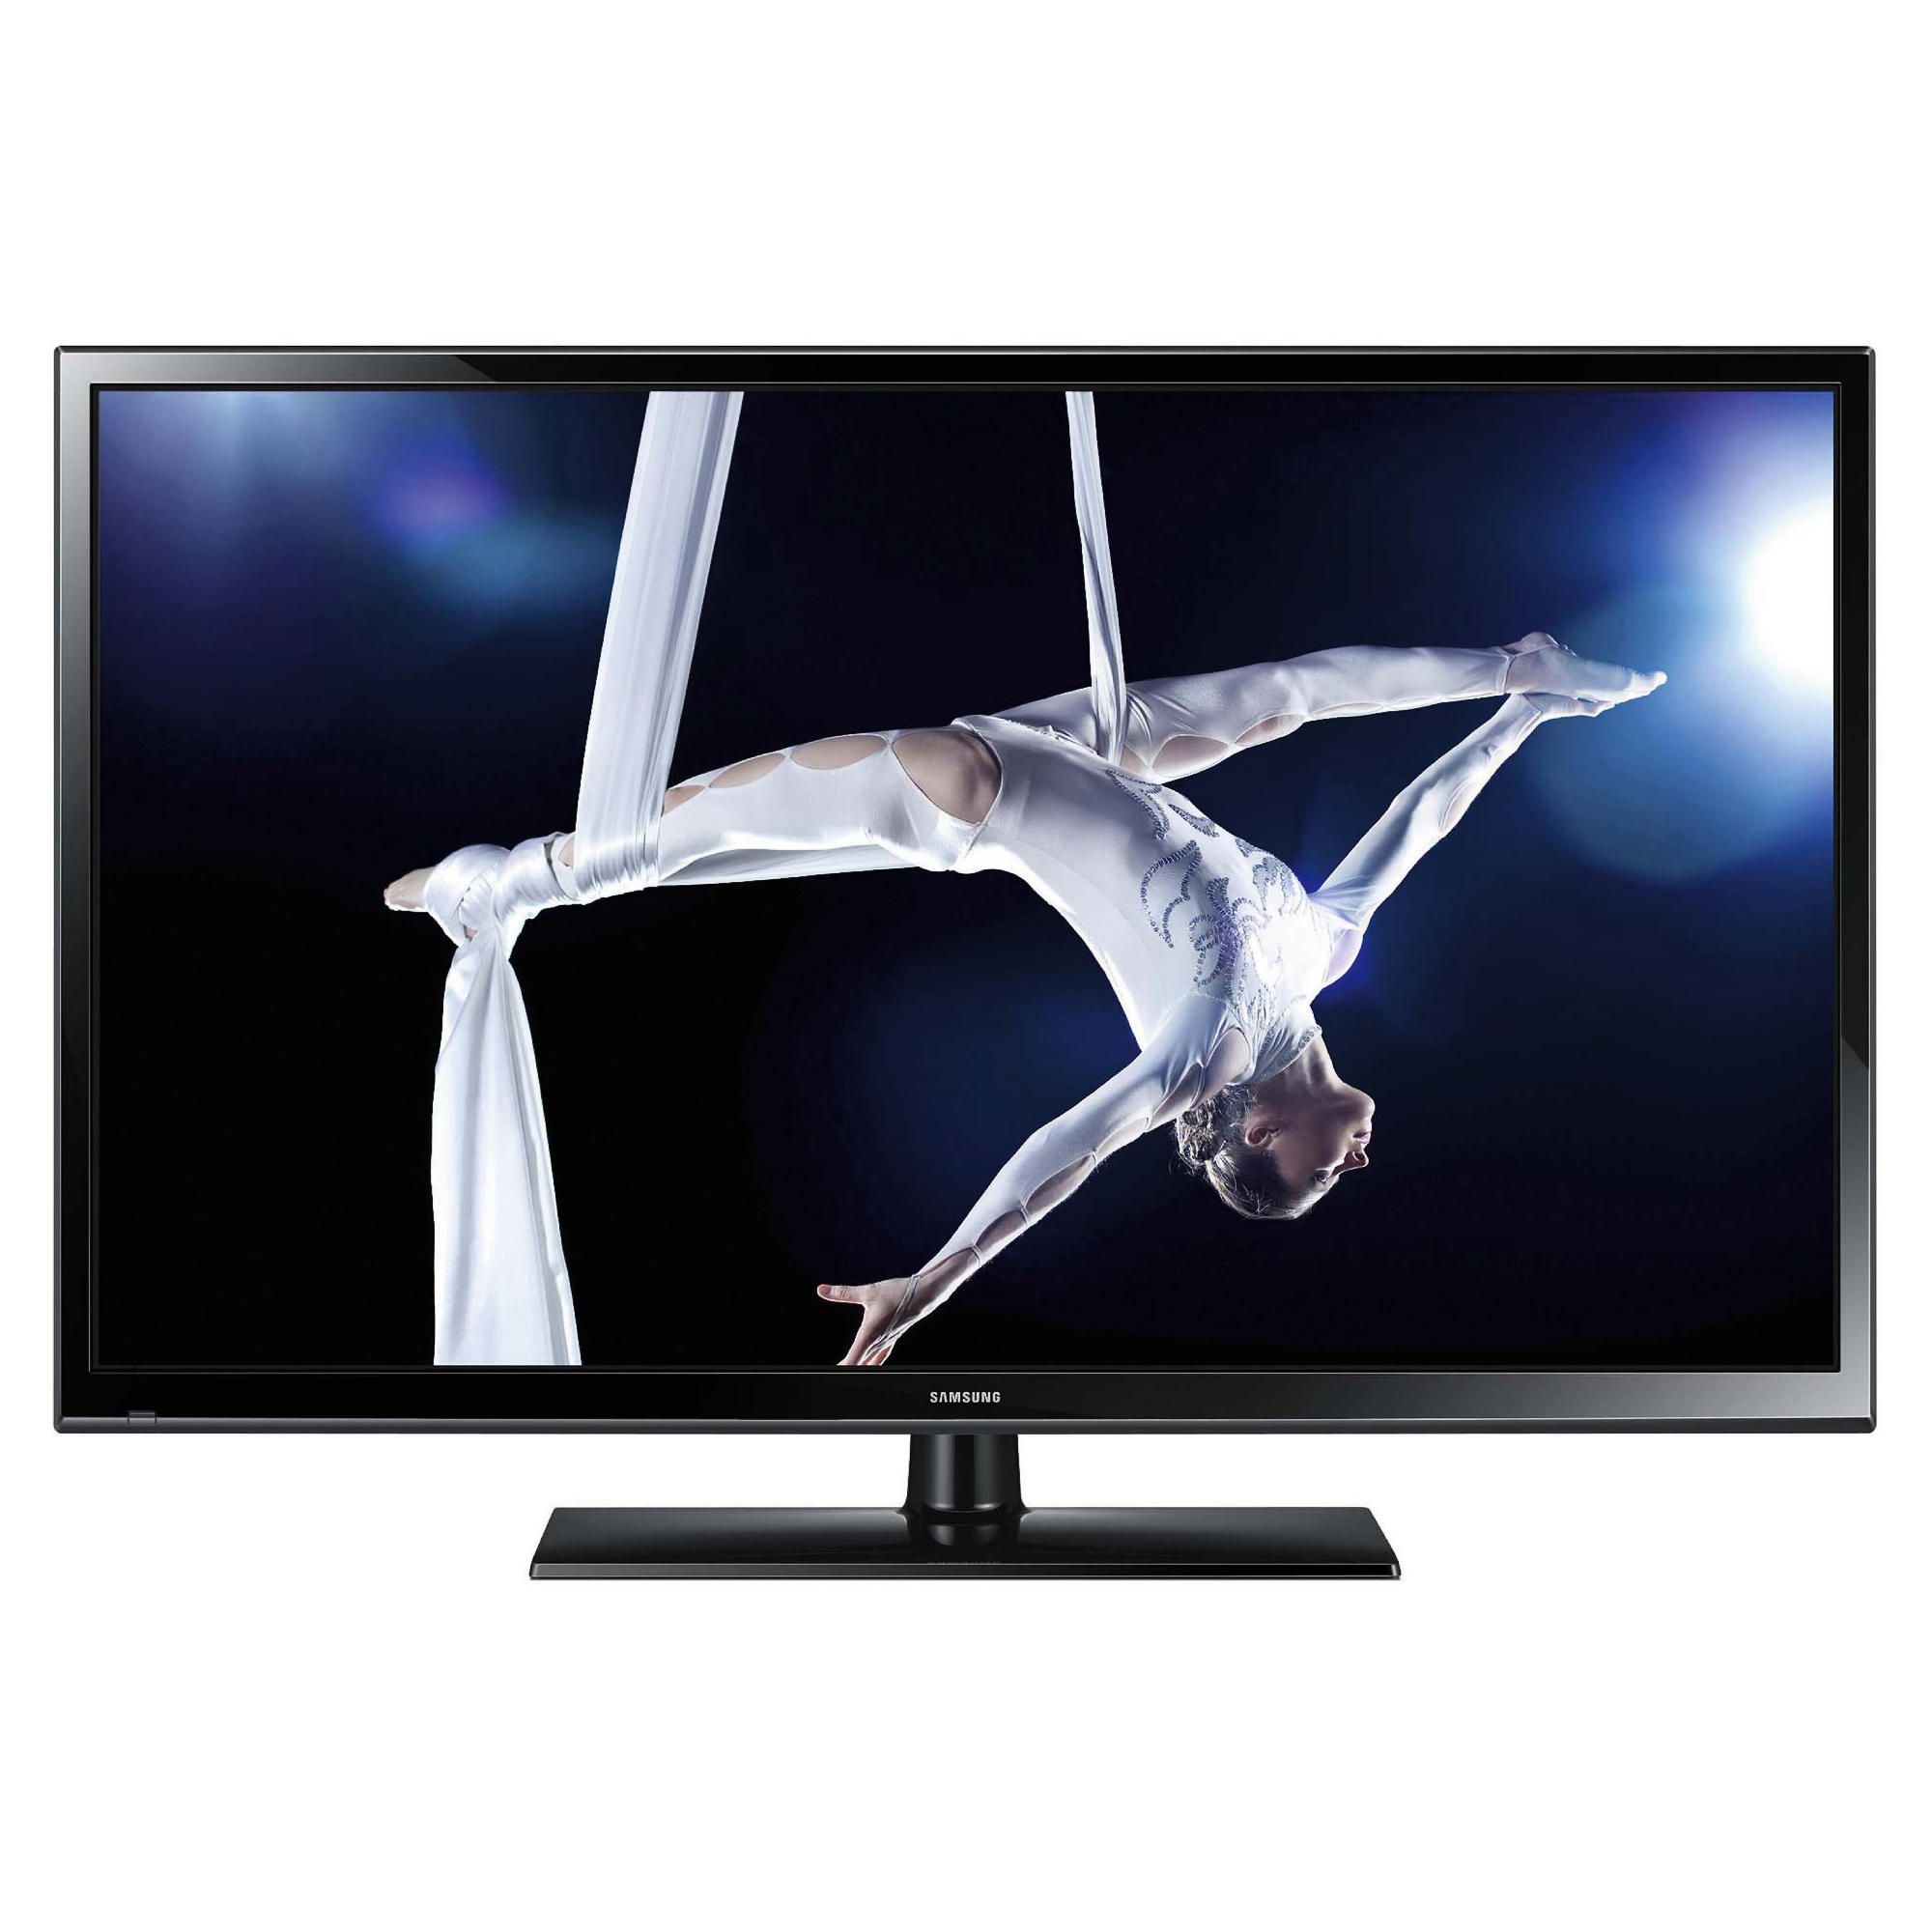 Samsung PS43F4500 43 Inch HD Ready 720p Plasma TV with Freeview